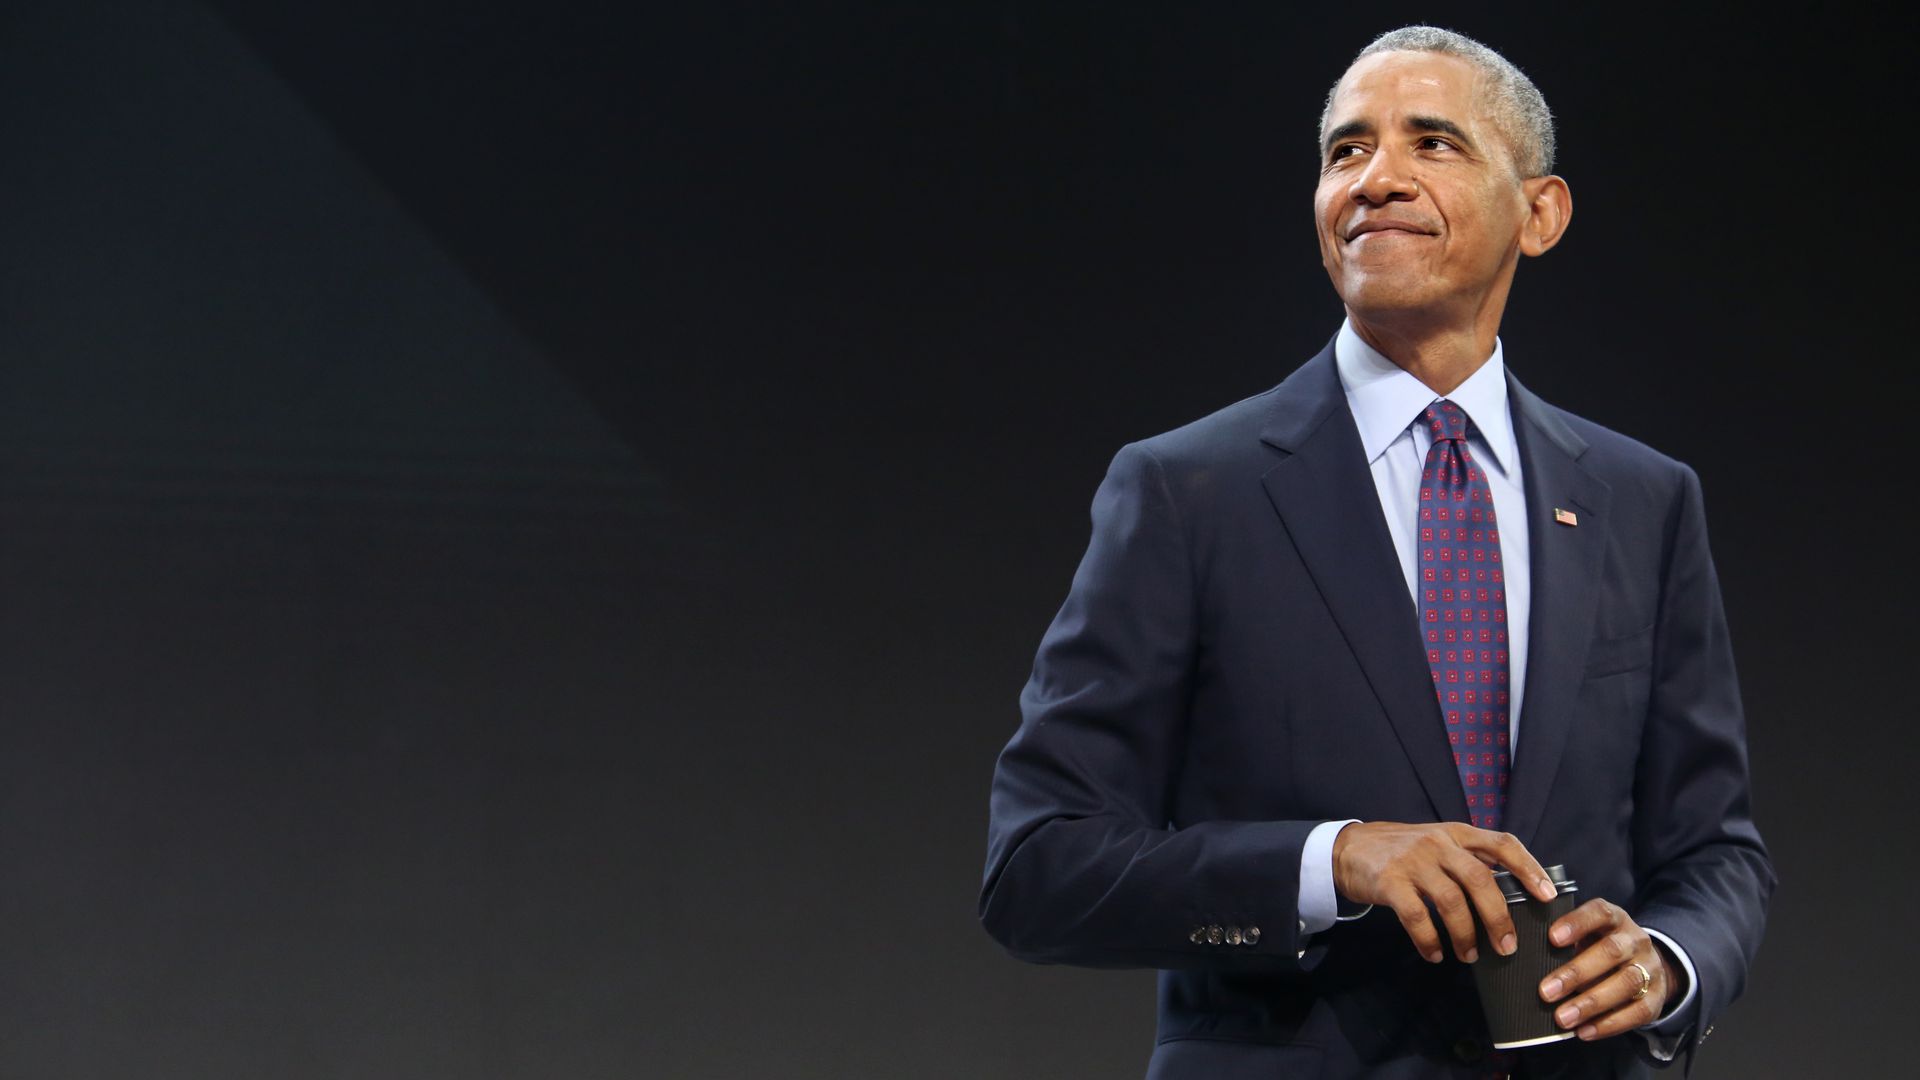 Barack Obama Endorses Candidates For The Midterm Elections